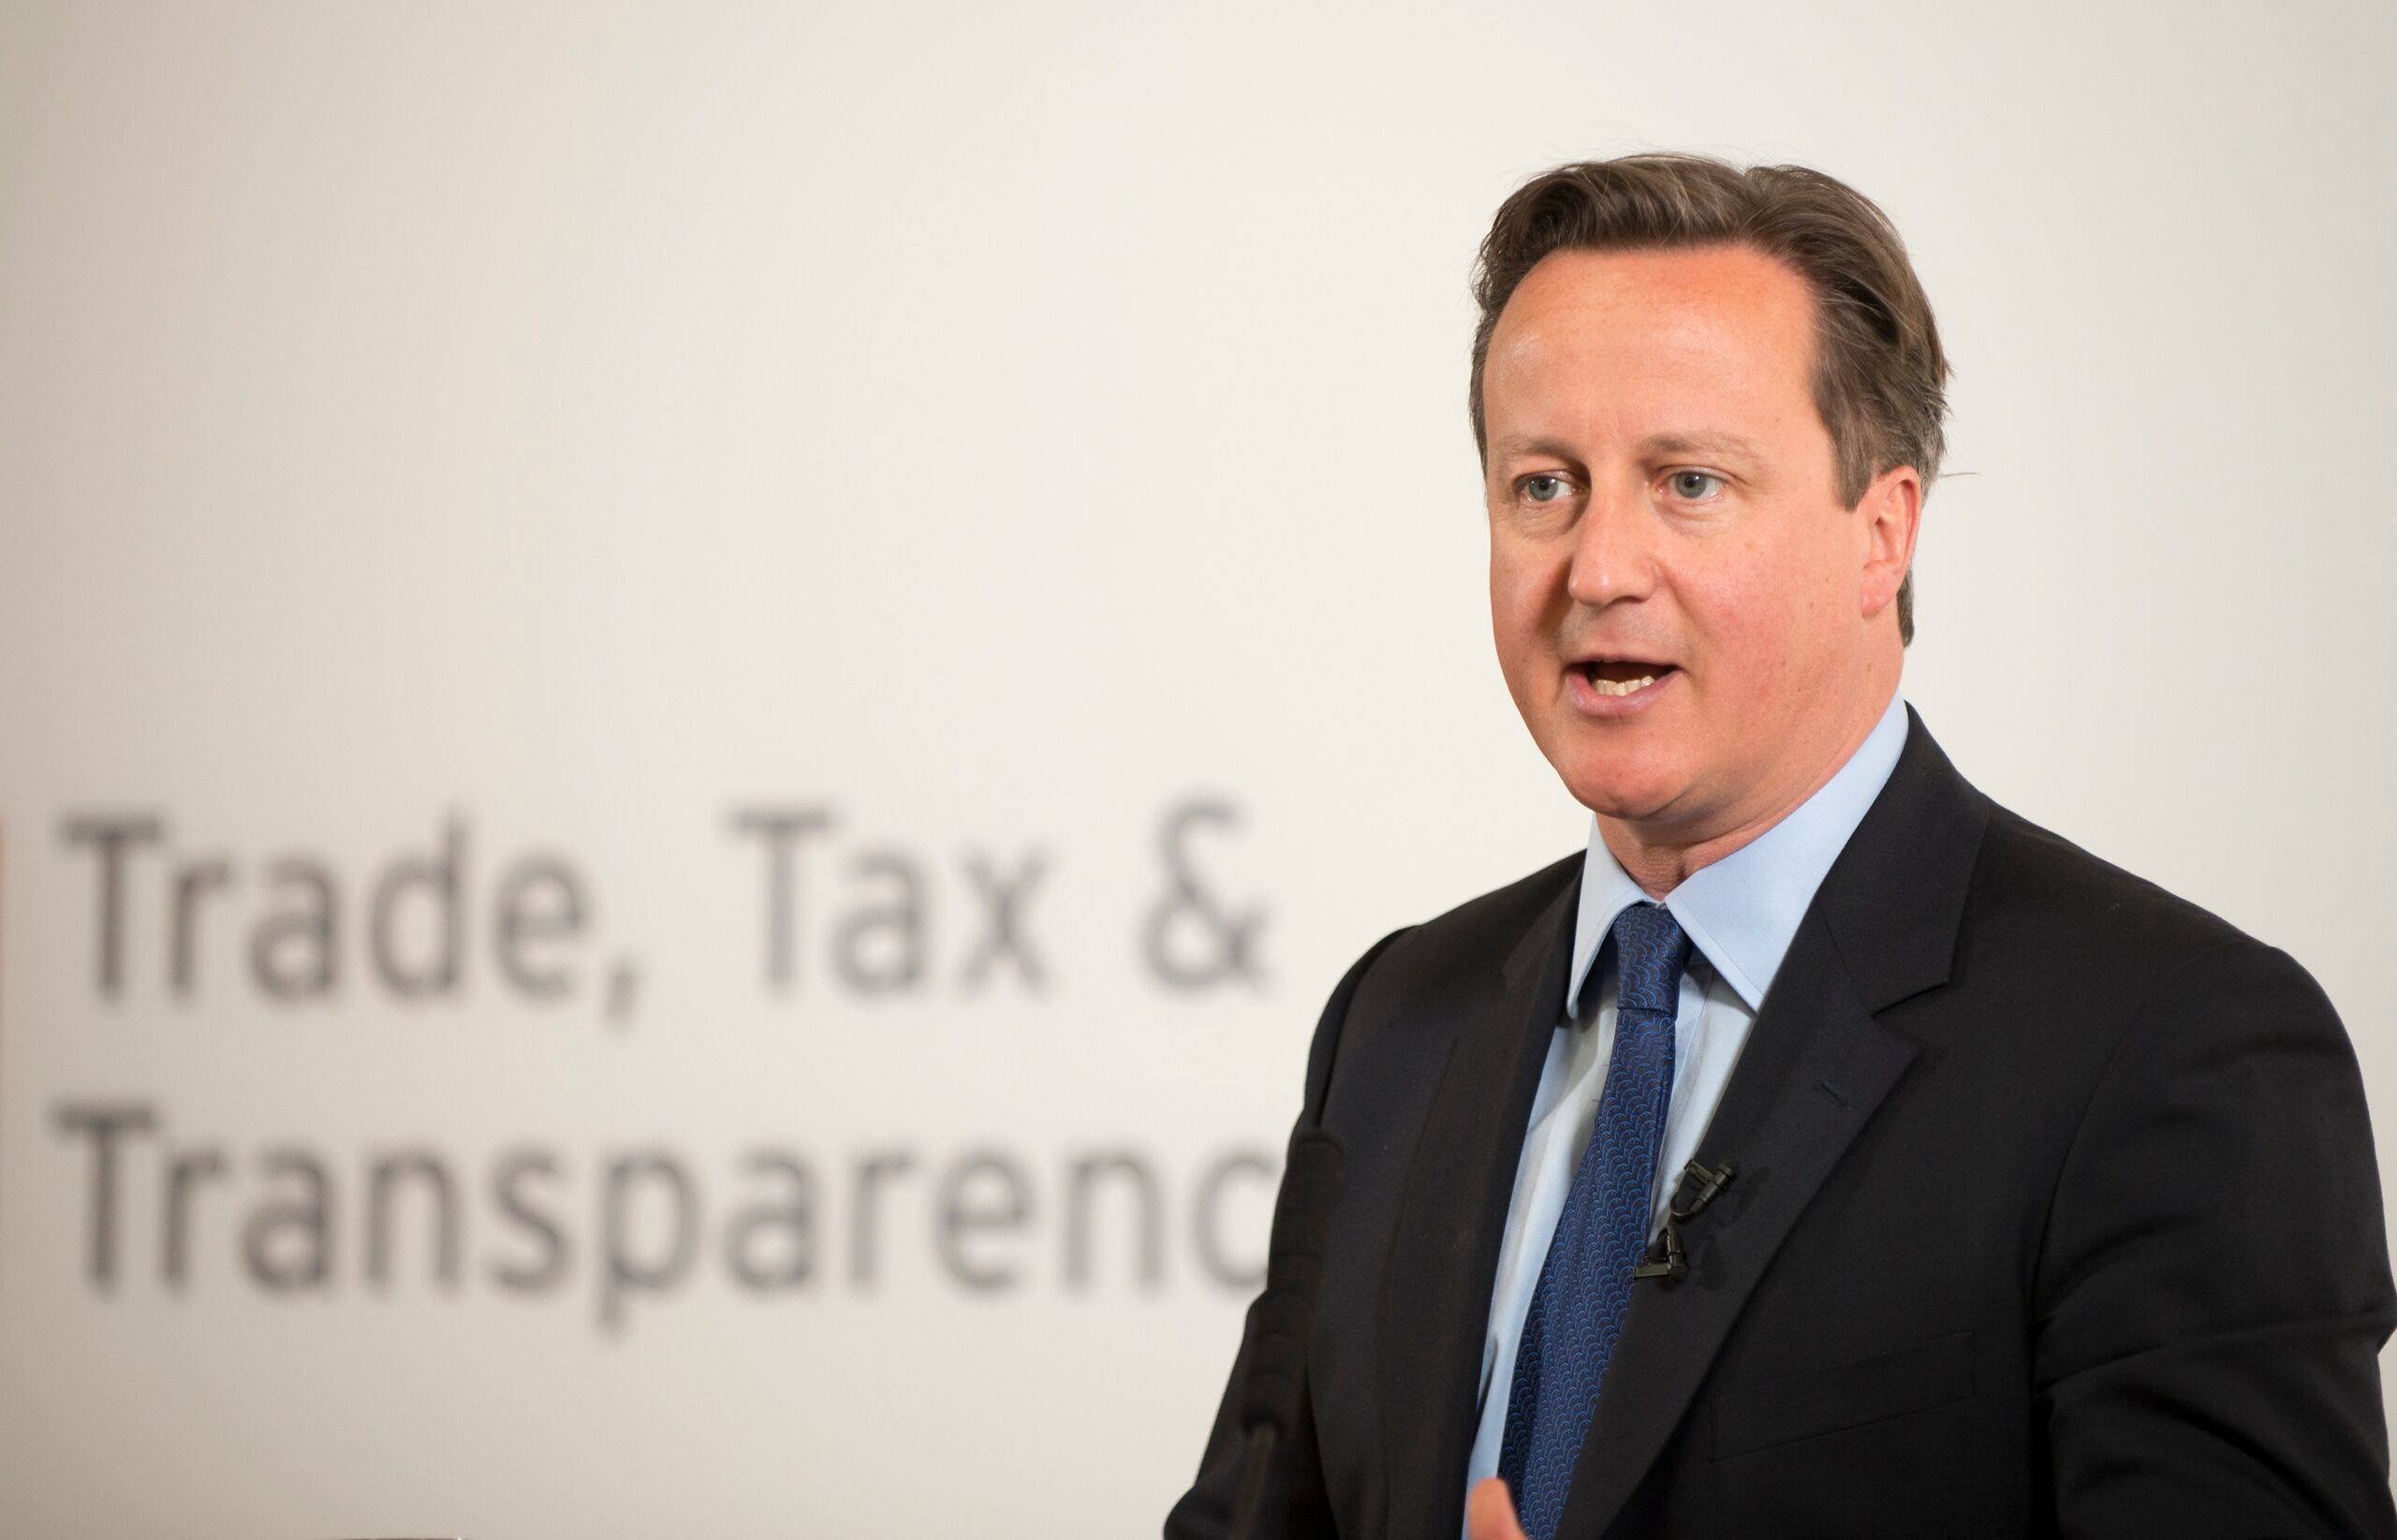 David Cameron is heavily implicated in the Greensill lobbying scandal